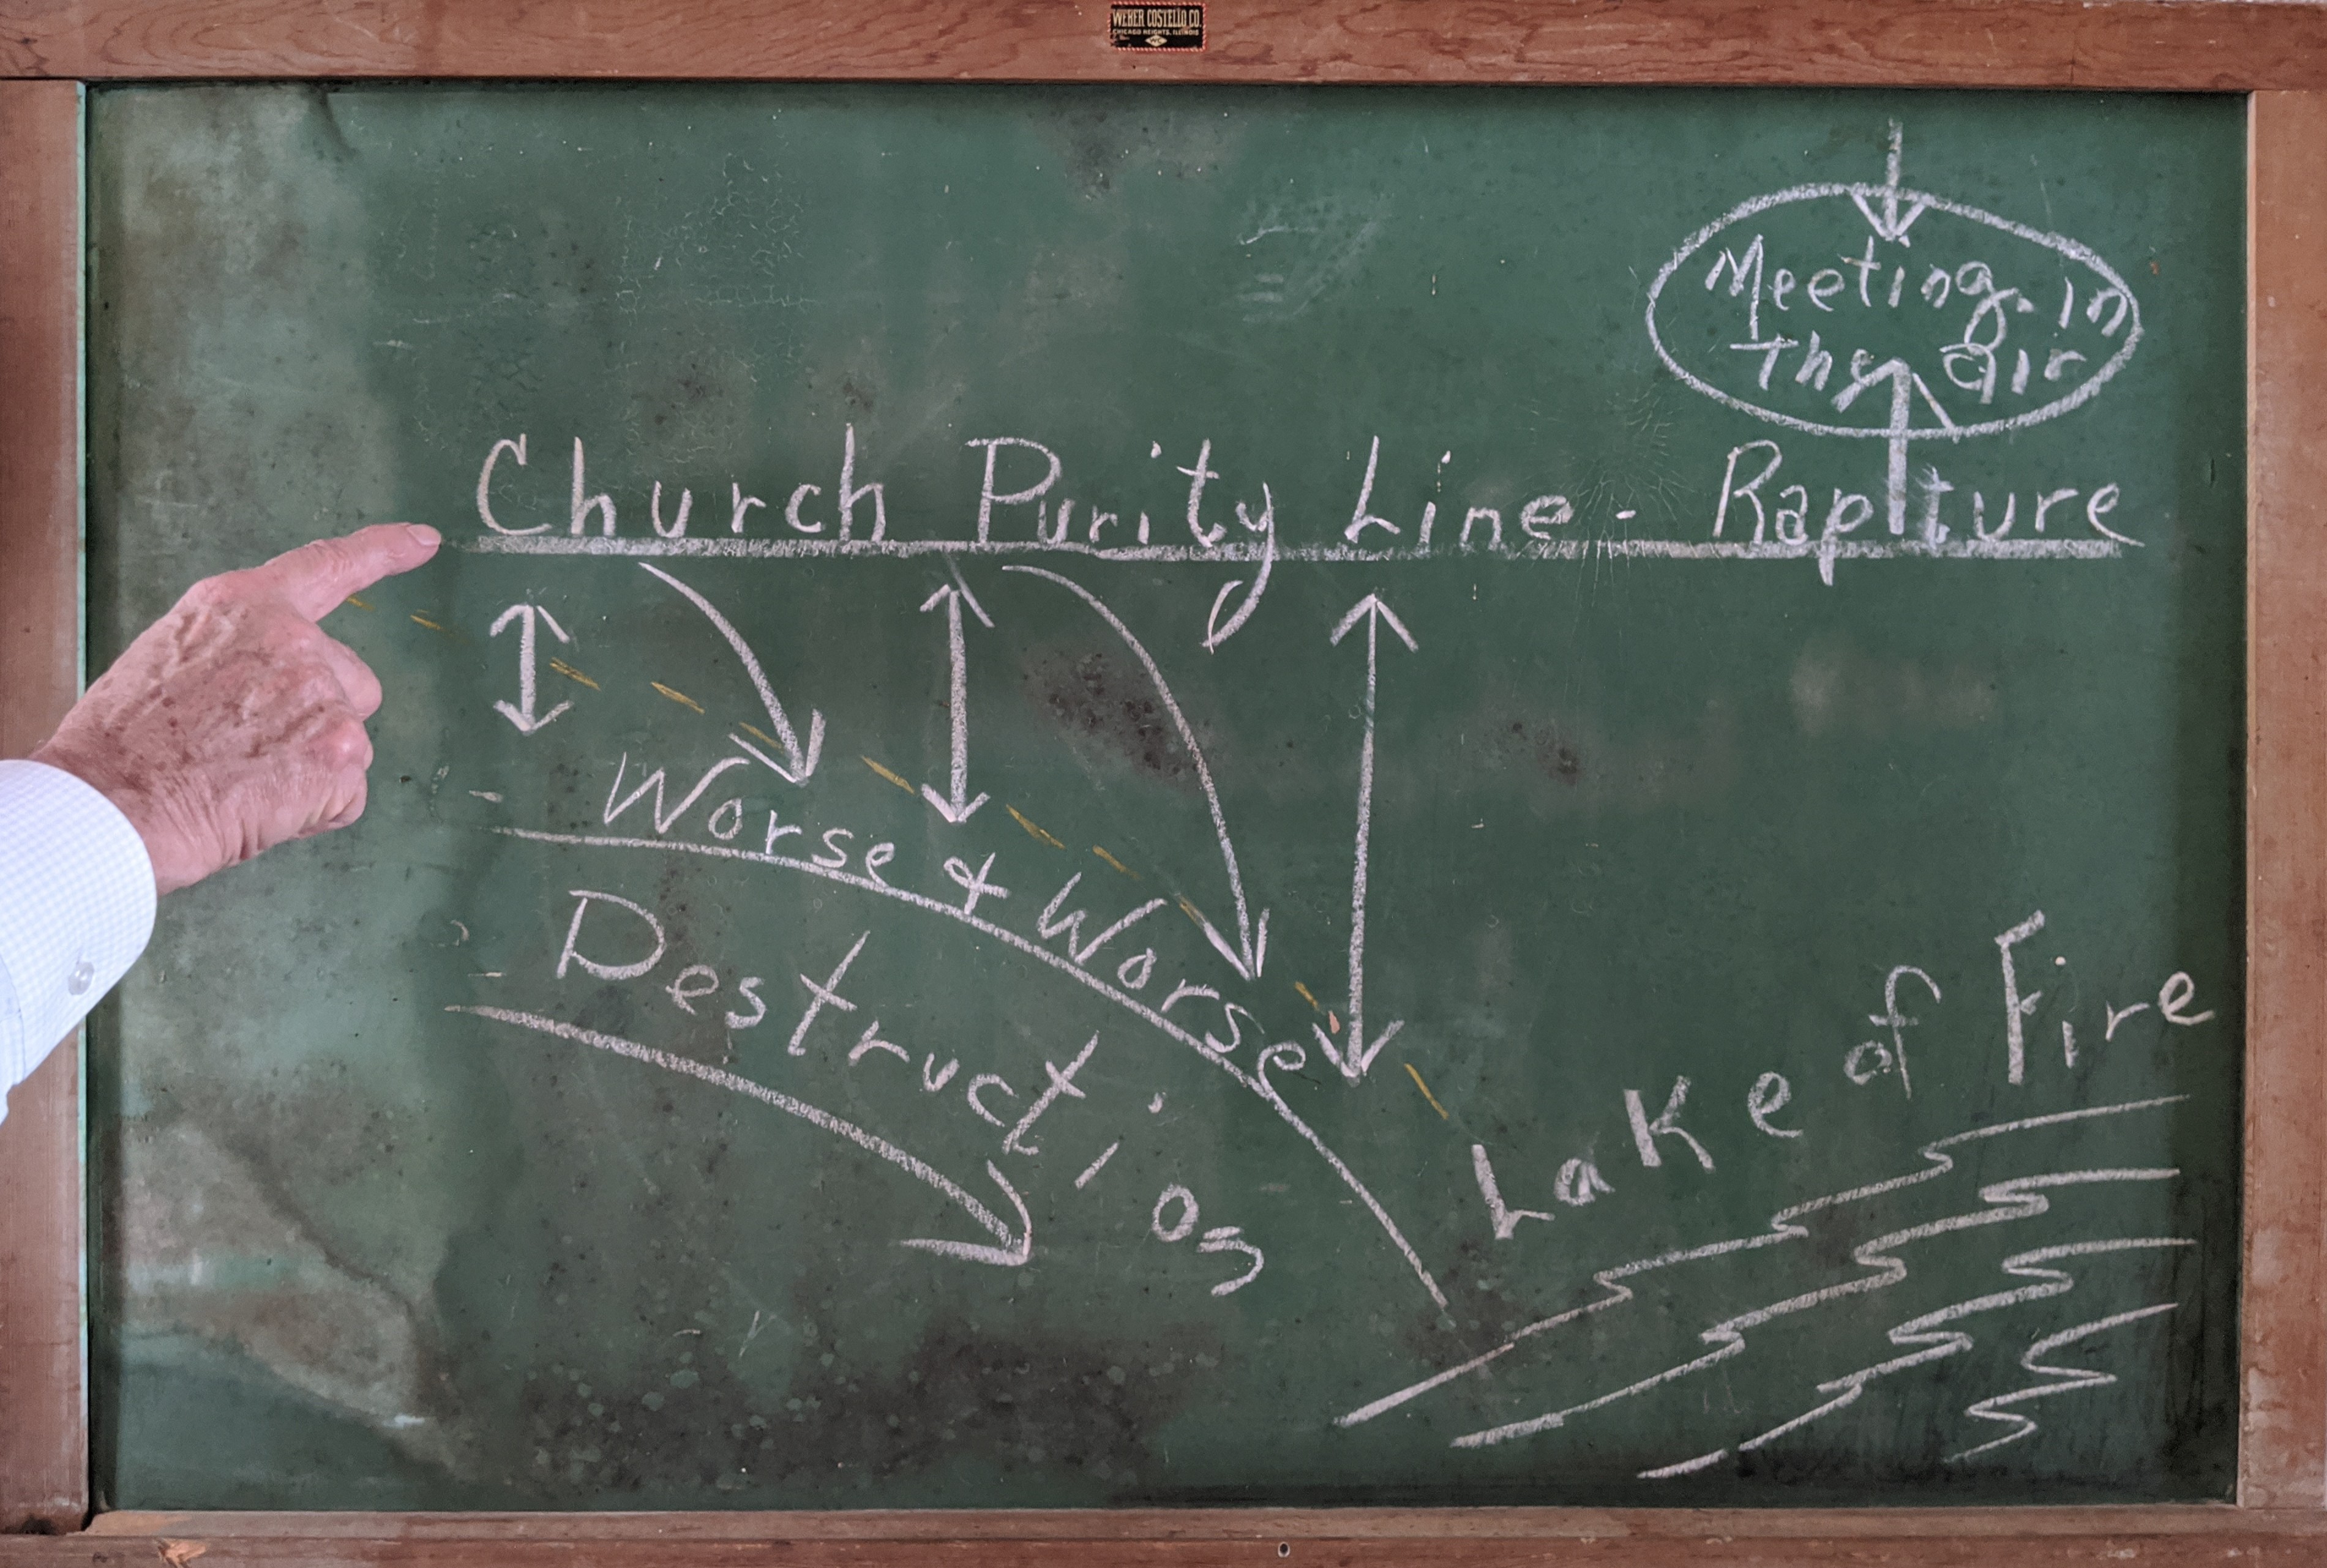 Aaron's drawing of the church and the world growing farther apart